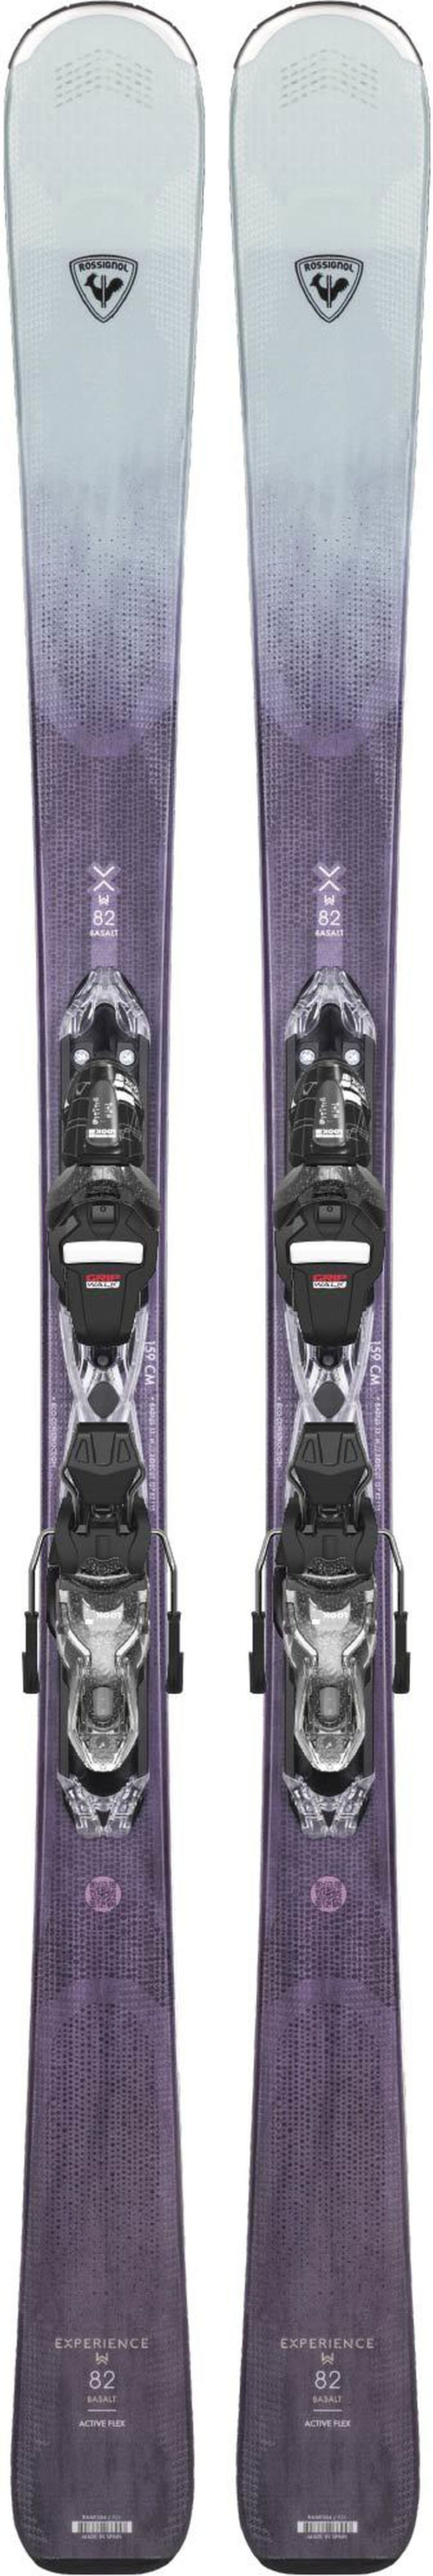 Rossignol Skis All Mountain femme EXPERIENCE W 82 BASALT (XPRESS) 